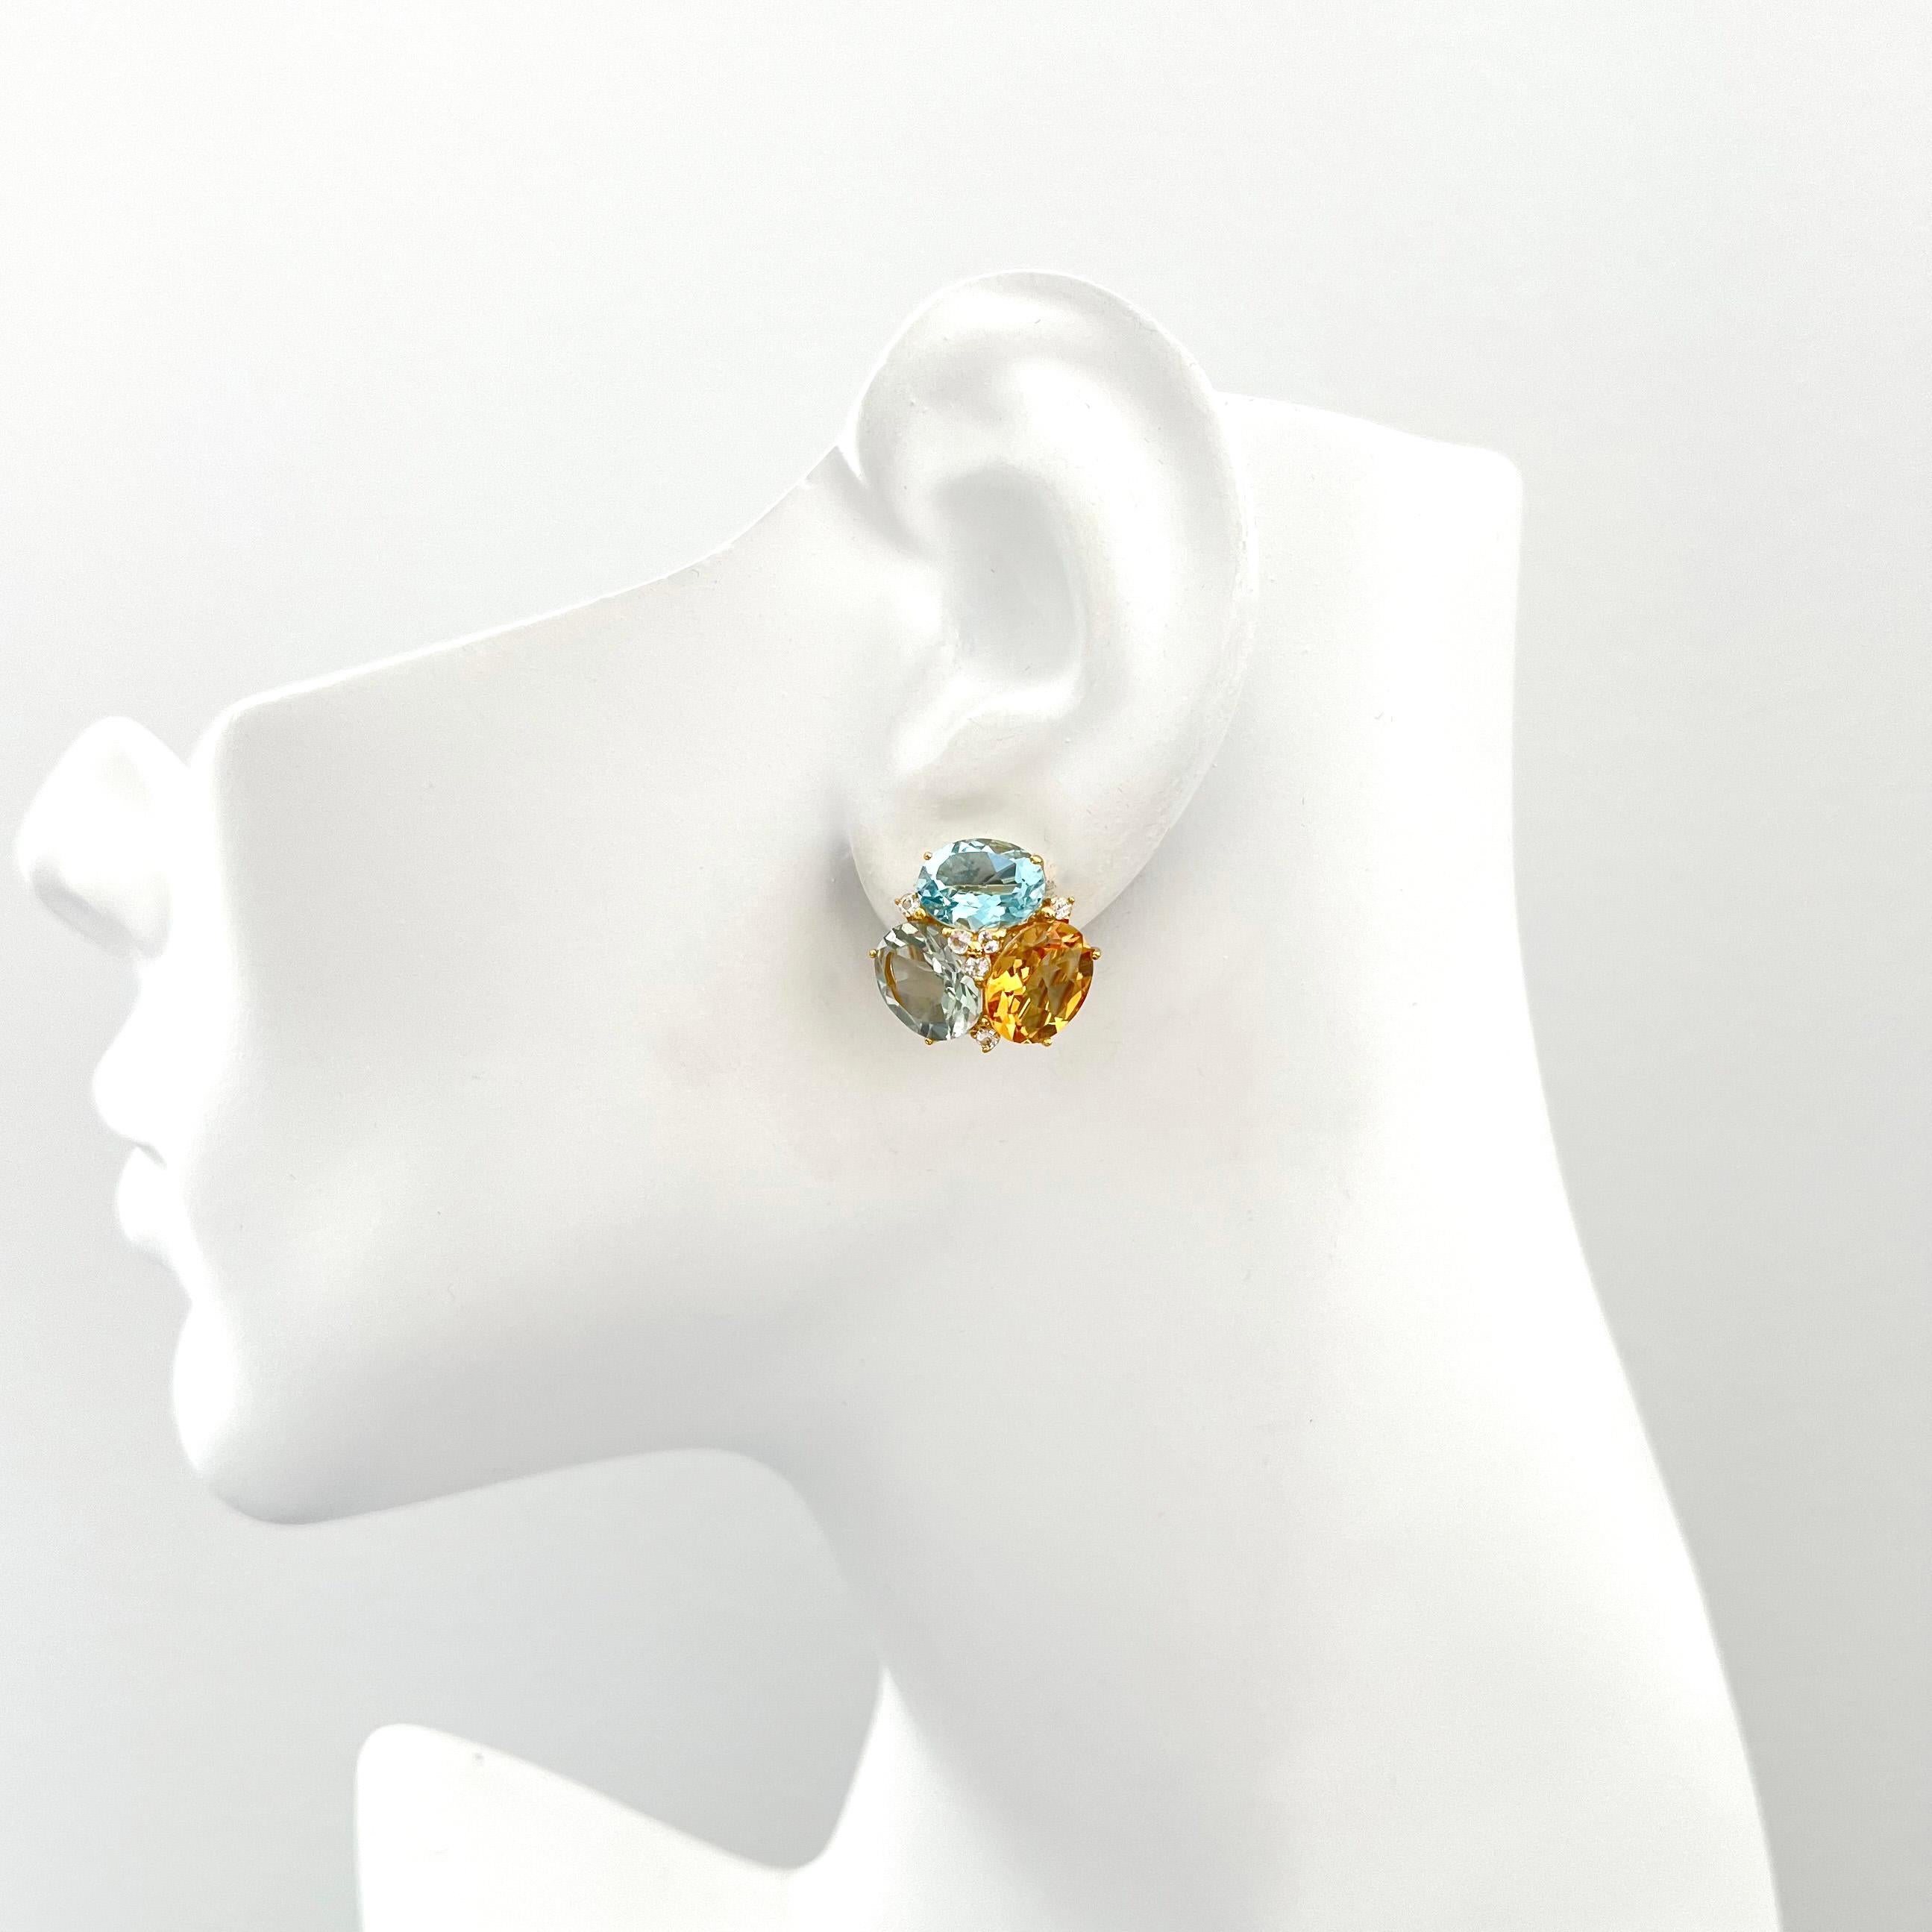 Stunning Triple Oval Blue Topaz, Citrine, Prasiolite Vermeil Earrings In New Condition For Sale In Los Angeles, CA